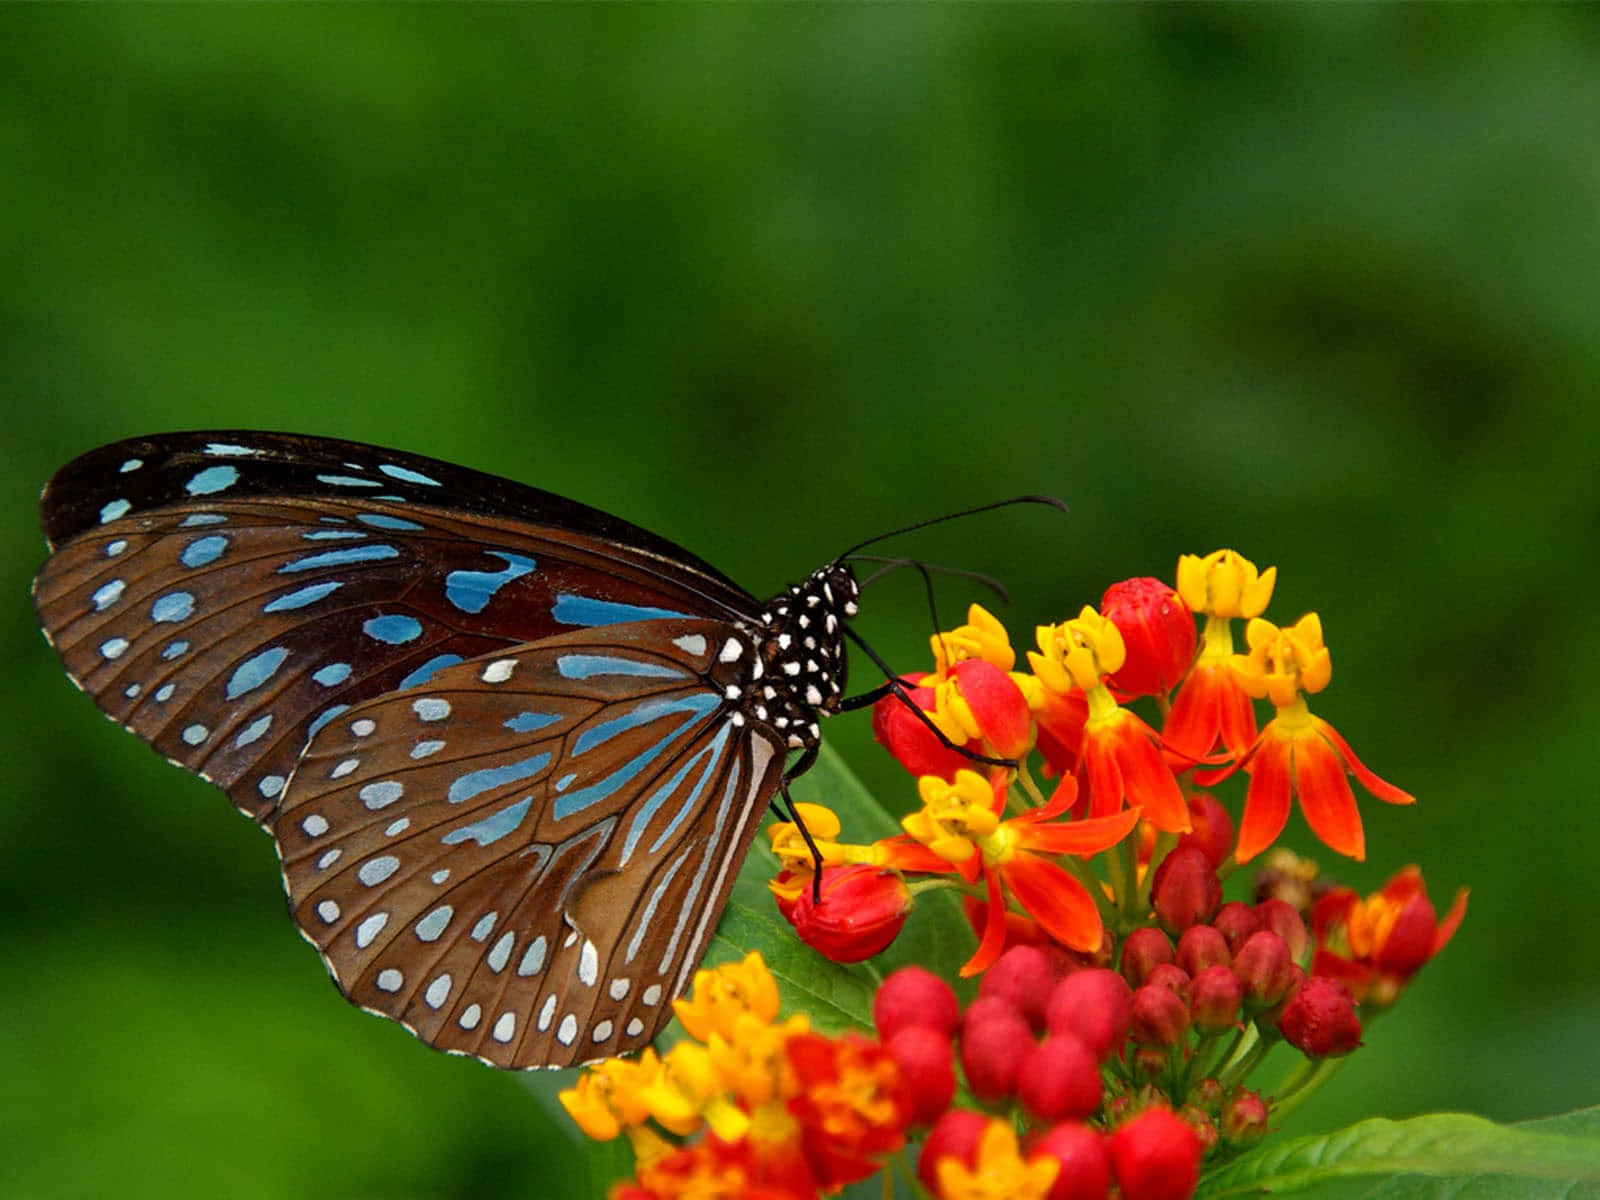 A Colorful Close-up of a Butterfly Wallpaper